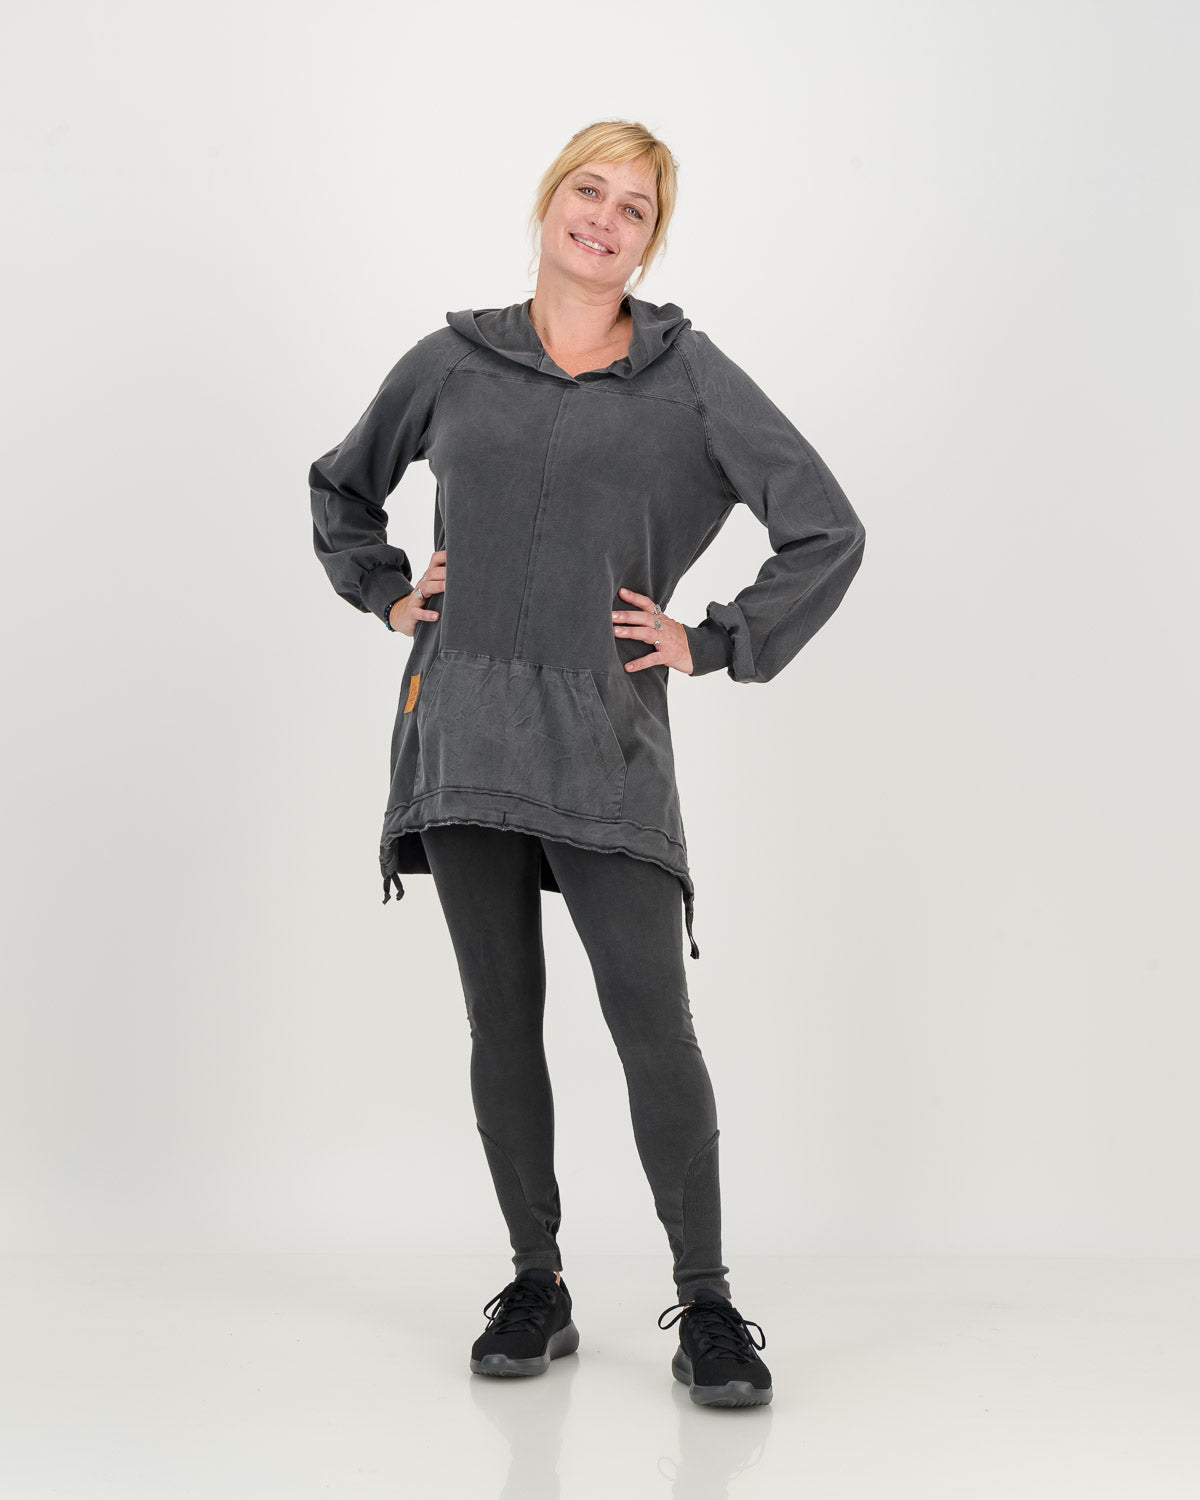 Long Overdyed charcoal Hoodie with front pocket, paired with matching cotton leggings